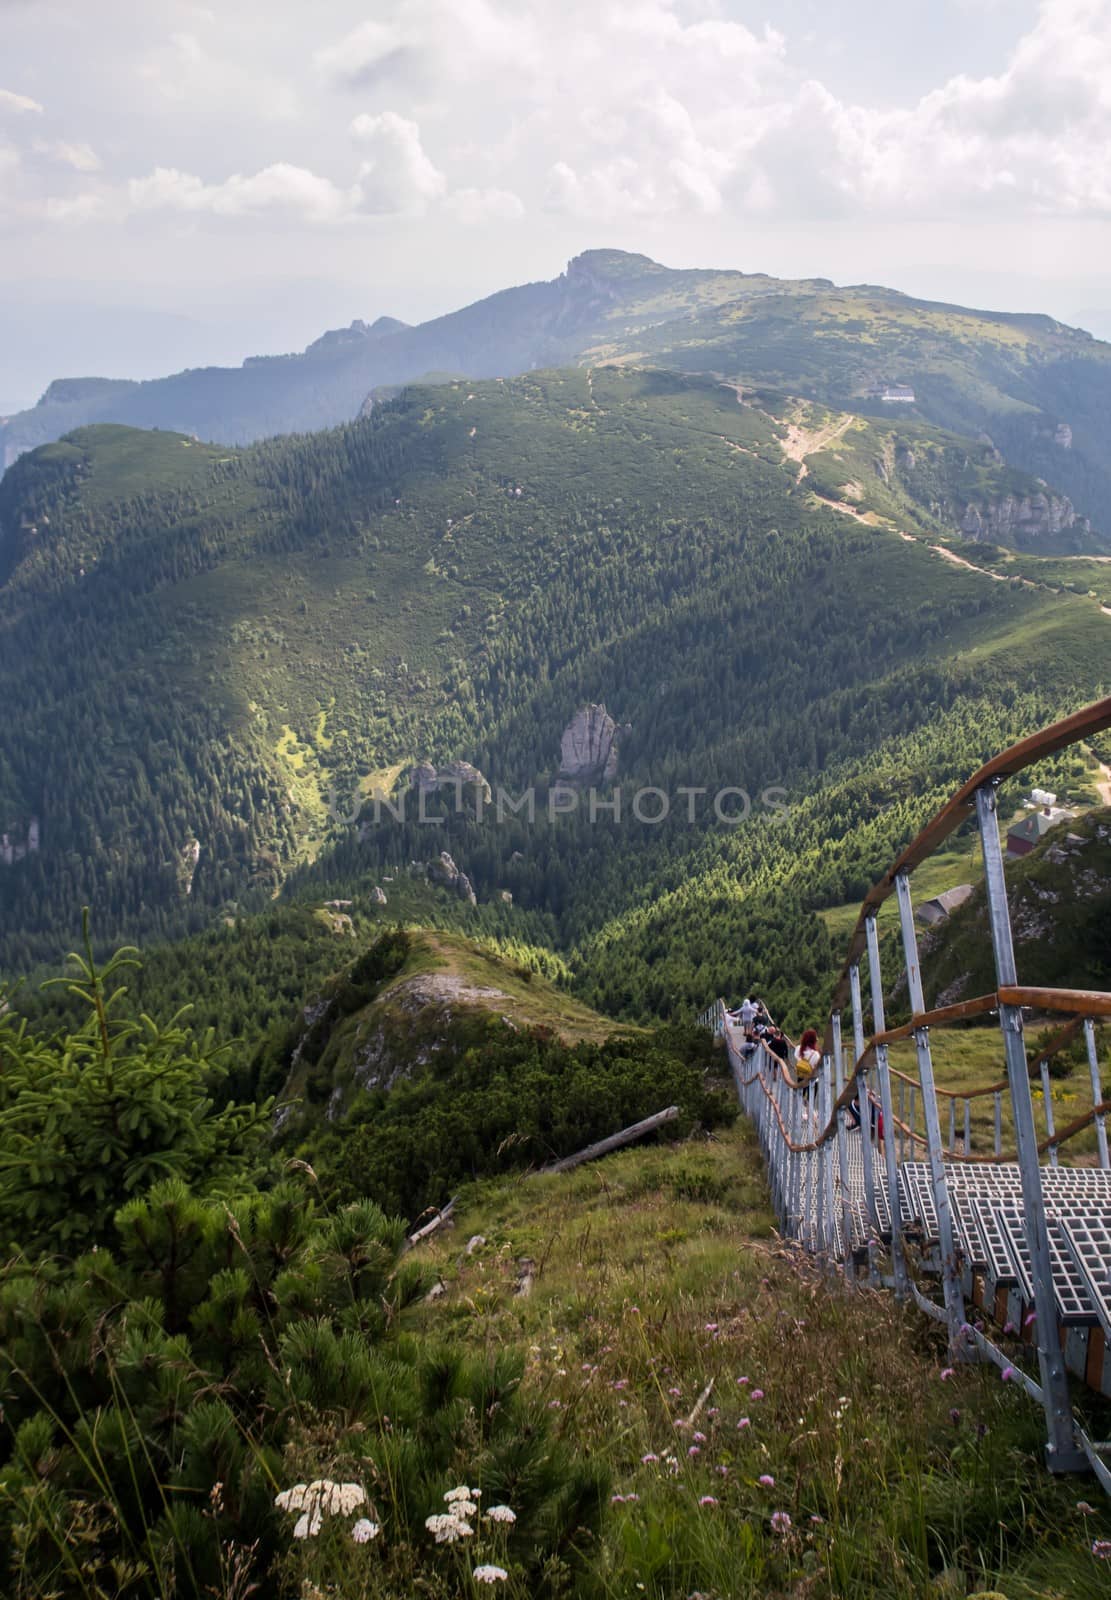 Staircase going down in the moutains - people on the mountain - landscape of mountains, Varful Toaca, Romania